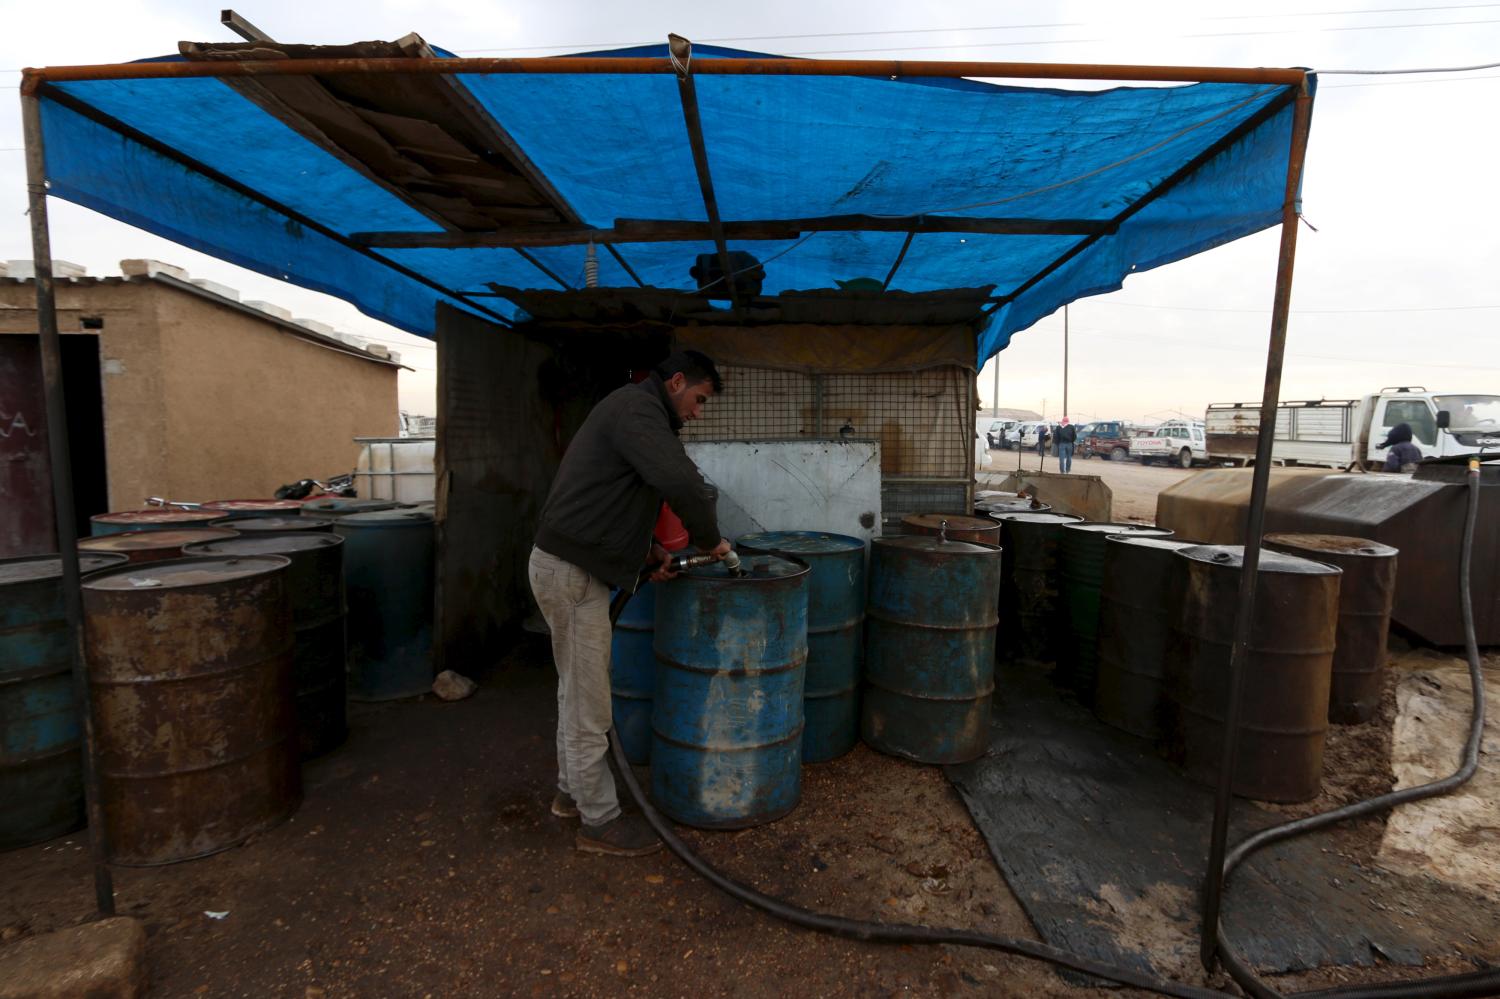 A man fills drums with oil for sale at the Syrian town of Ras al-Ain, close to the Turkish border, January 23, 2016. REUTERS/Rodi Said